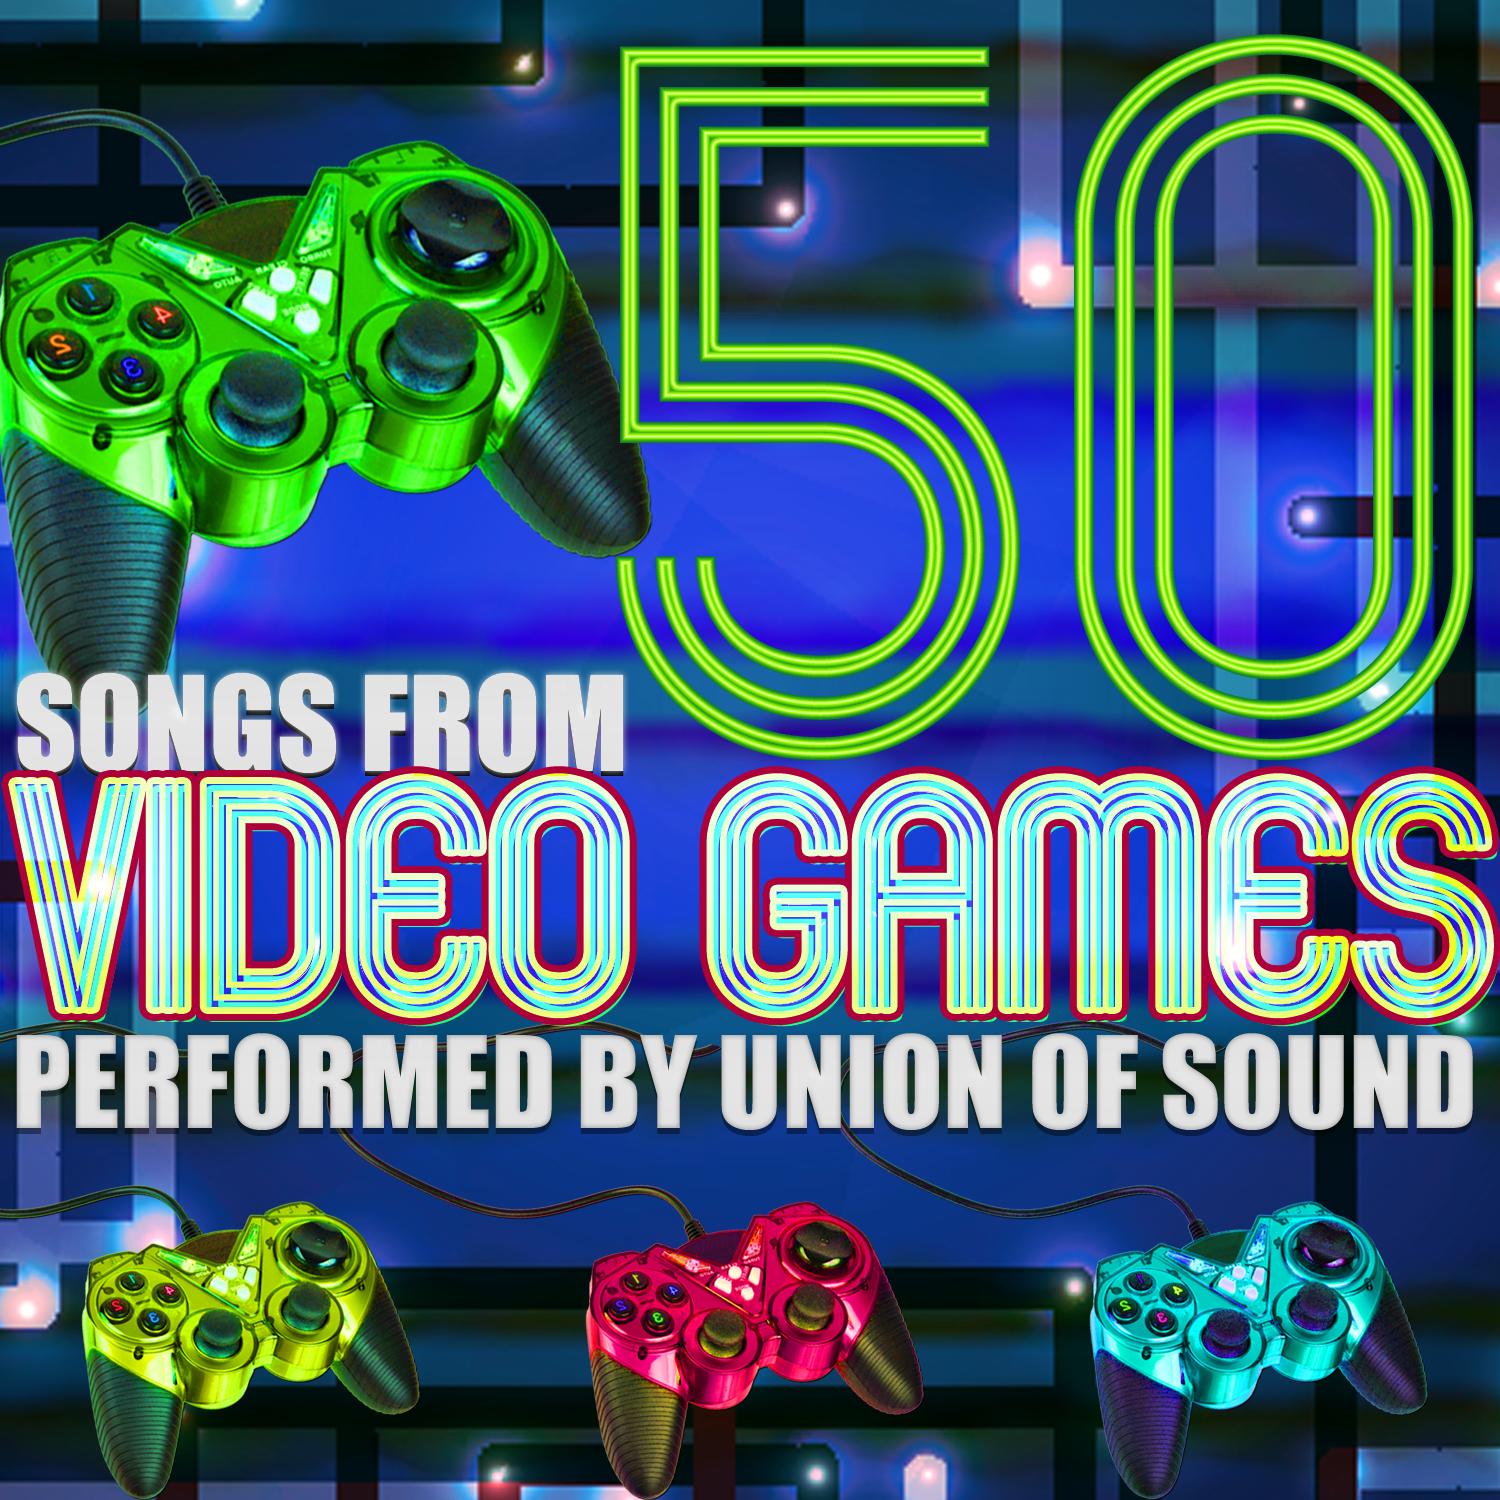 50 Songs from Video Games